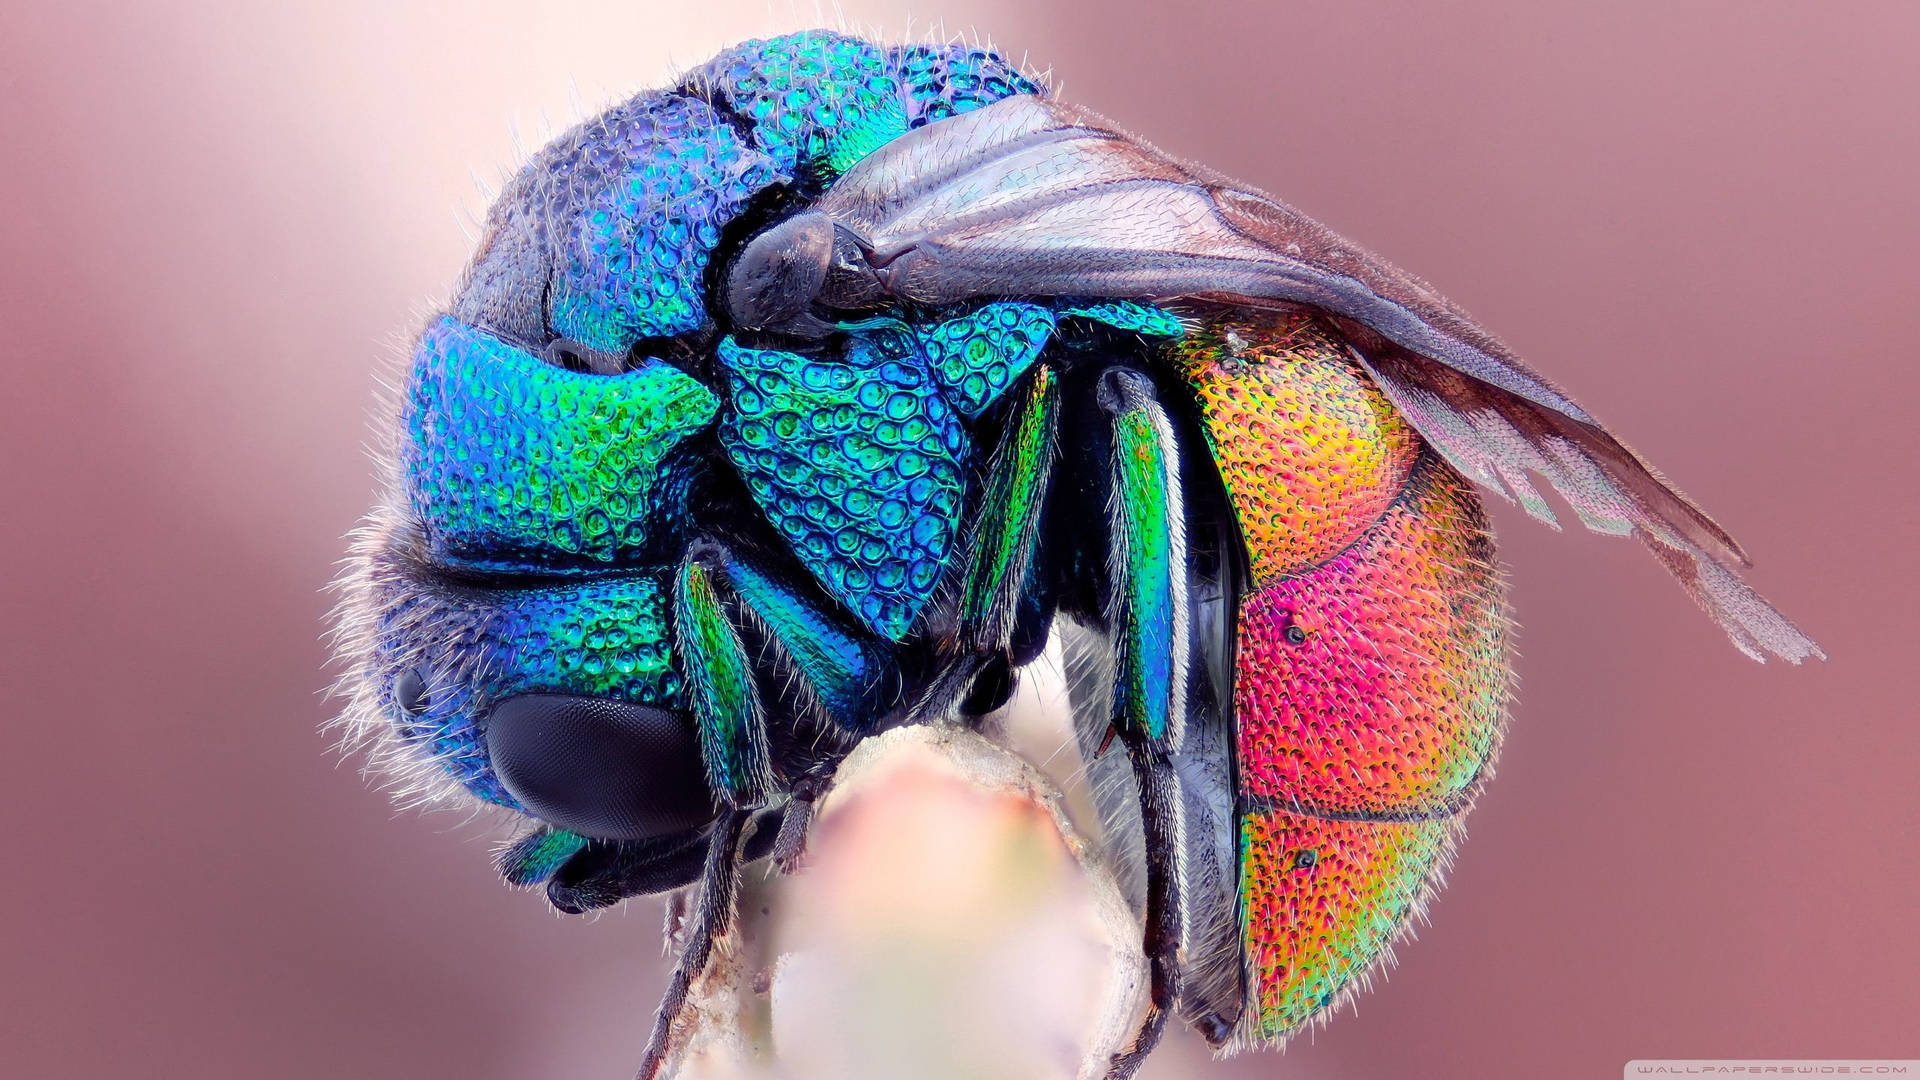 Insect With Iridescent Body Wallpaper